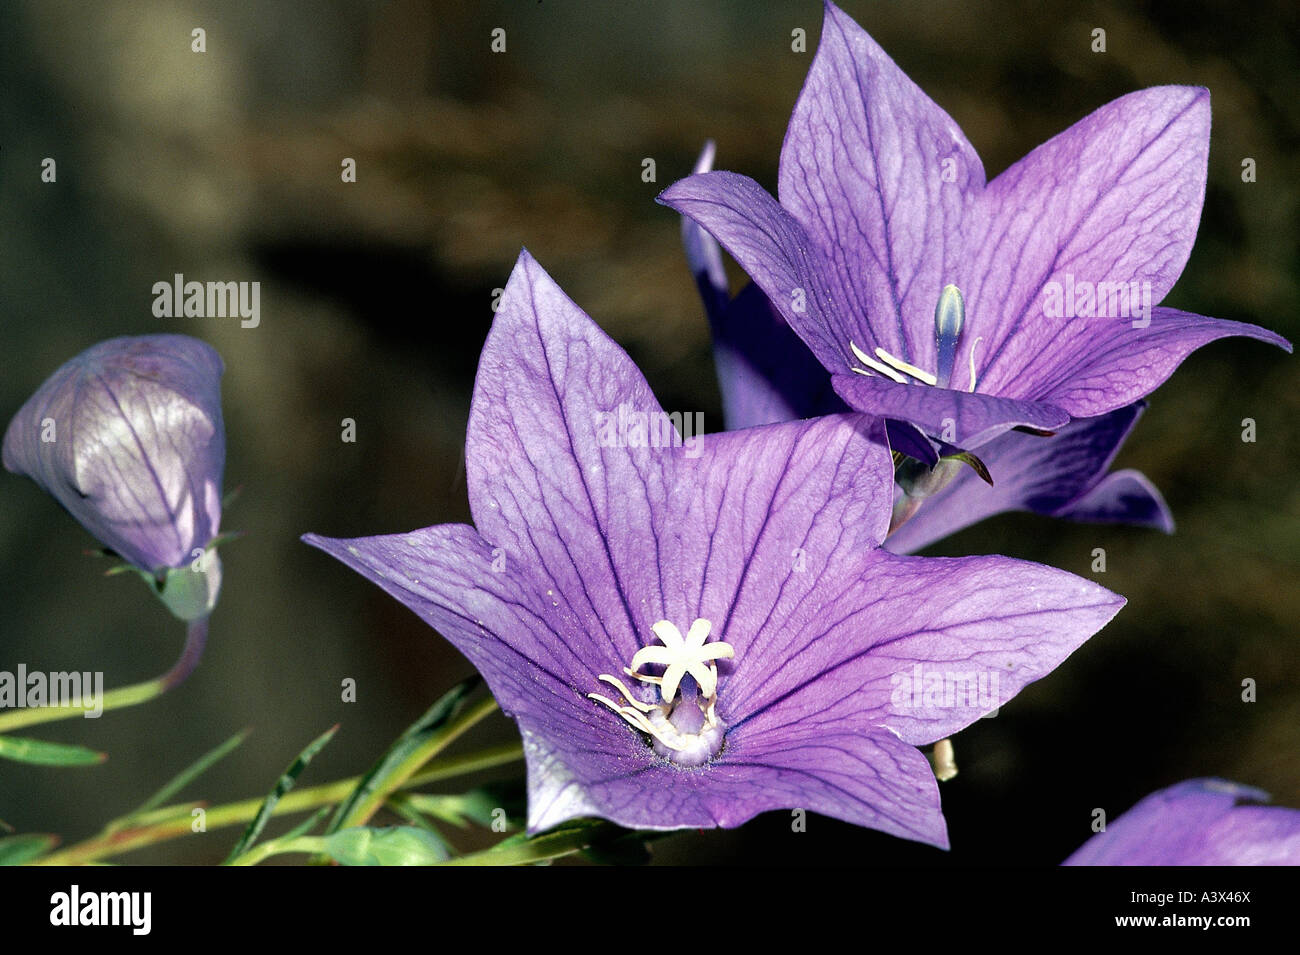 botany, Chinese bellflower, (Platycodon grandiflorum), blossoms, detail, close-up, purple, violet, close up, platycodon, common Stock Photo